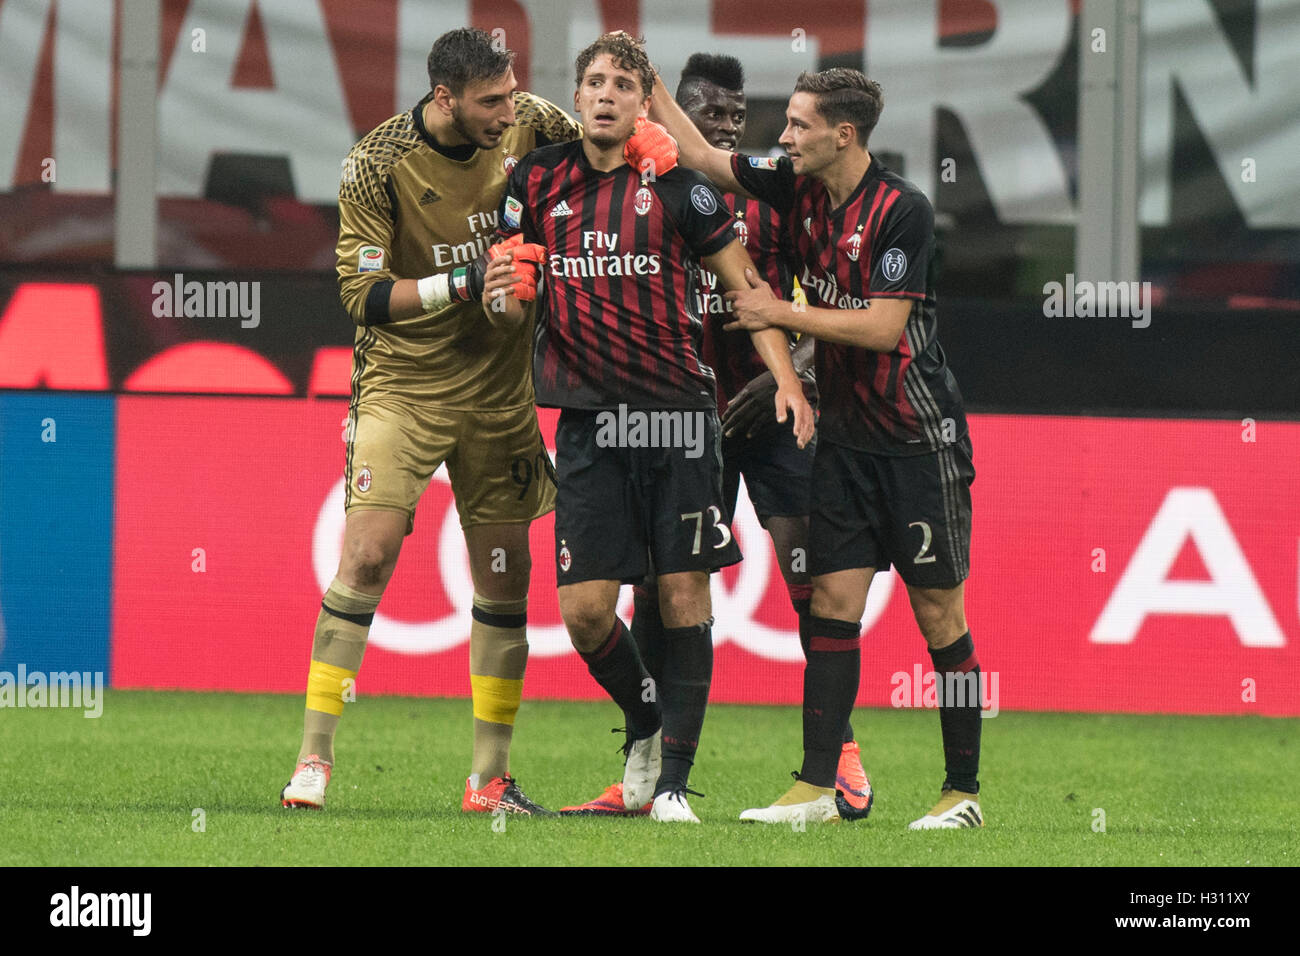 Milan, Italy. 2nd Oct, 2016. AC Milan team group, OCTOBER 2, 2016 - Football/Soccer : Manuel Locatelli (2L) of AC Milan celebrates after scoring their 3rd goal during the Italian 'Serie A' match between AC Milan 4-3 US Sassuolo at Stadio Giuseppe Meazza in Milan, Italy, Credit:  Enrico Calderoni/AFLO SPORT/Alamy Live News Stock Photo